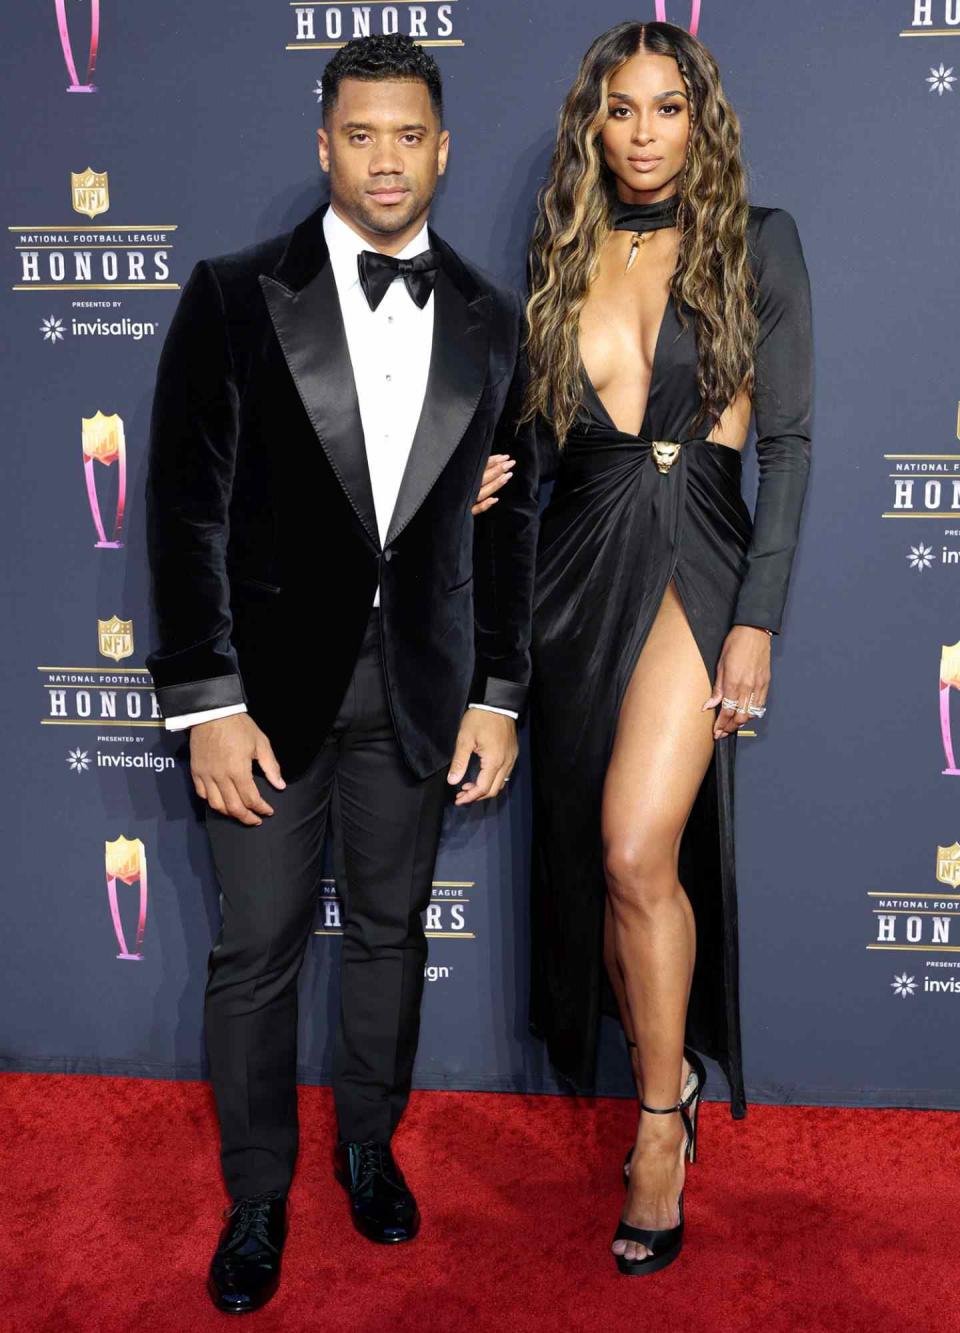 Russell Wilson and Ciara attend the 11th Annual NFL Honors